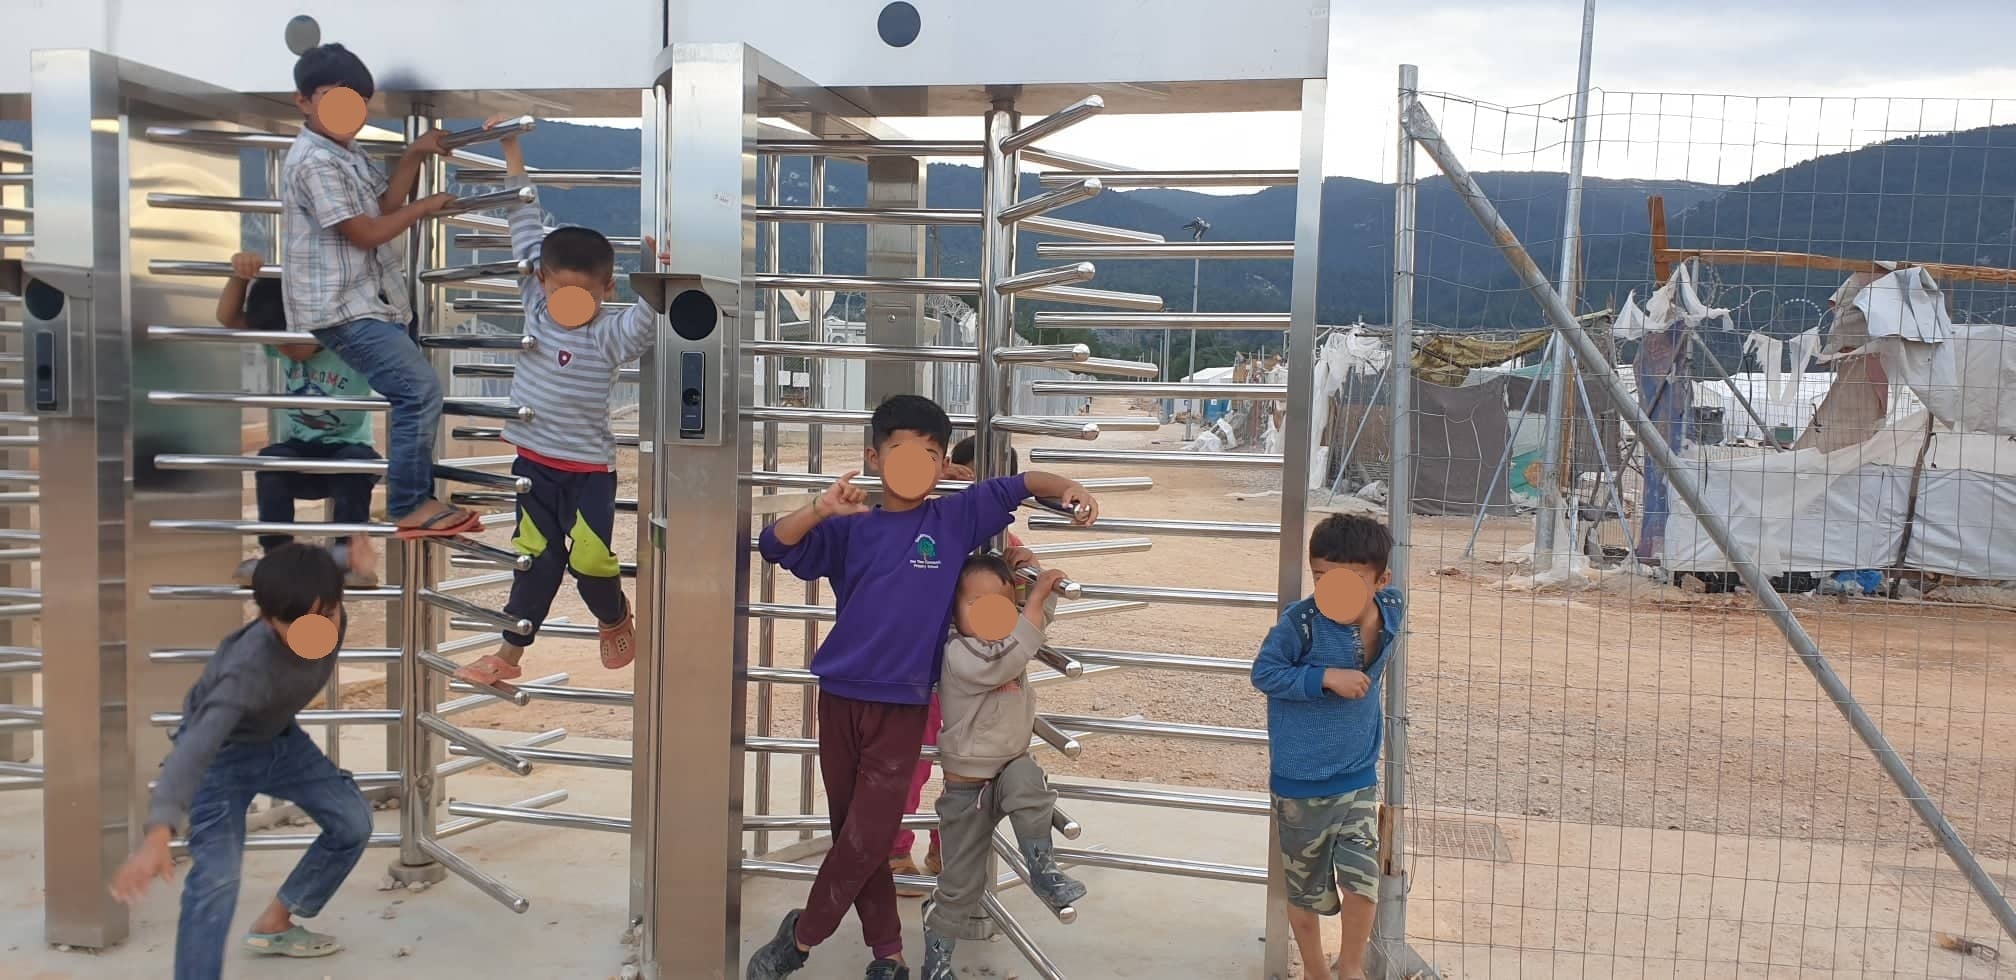 Refugee Camps in Greece: From Asylum to Imprisonment